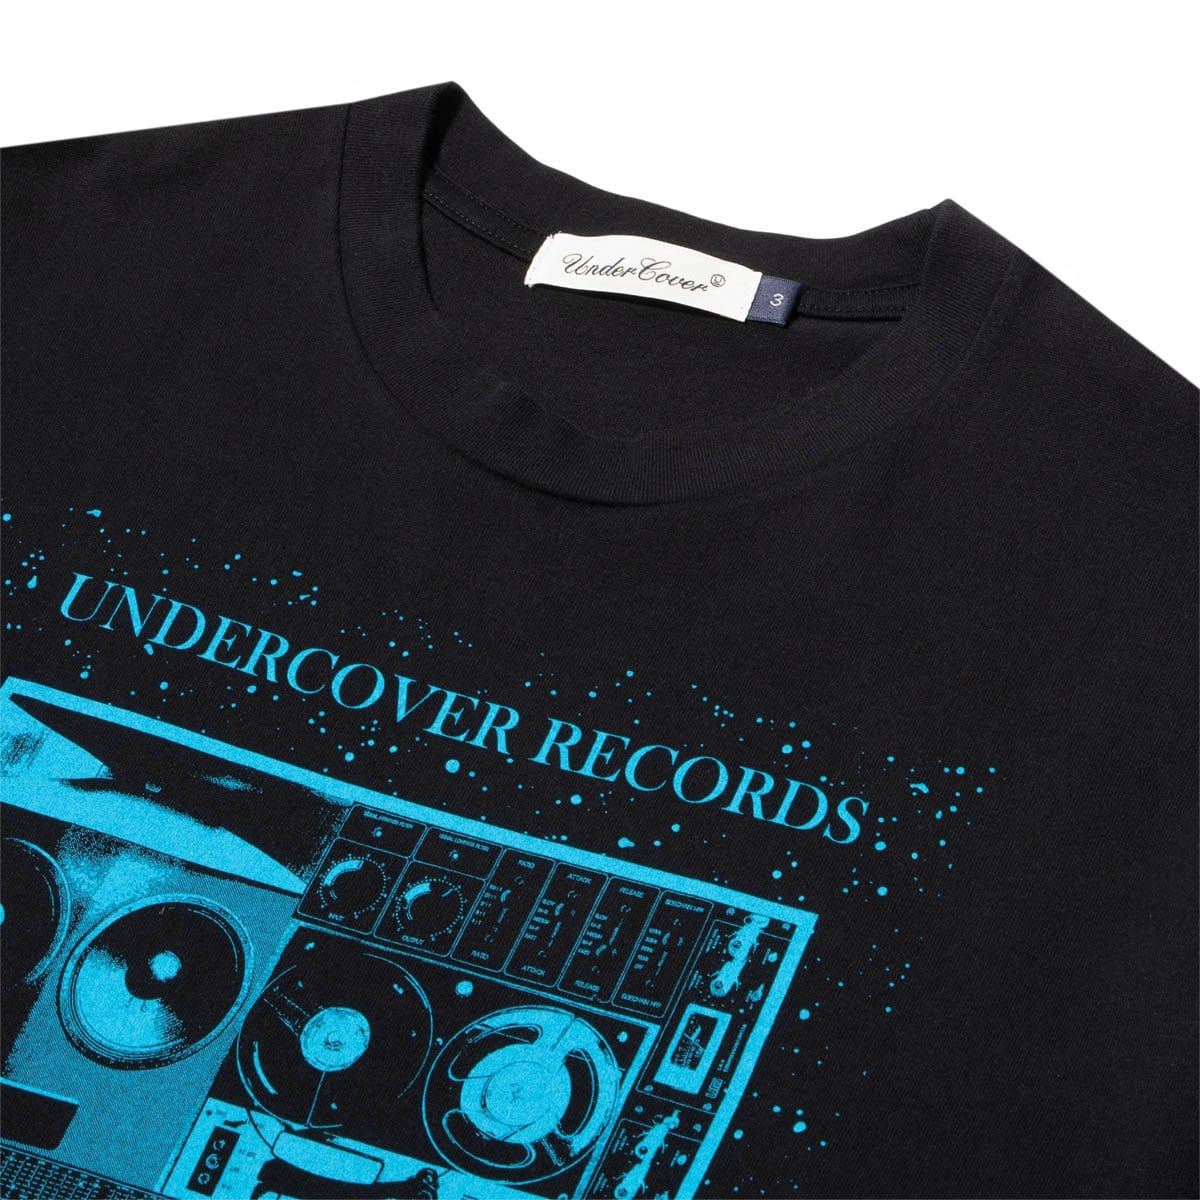 Undercover T-Shirts UC1A3803 T-SHIRT